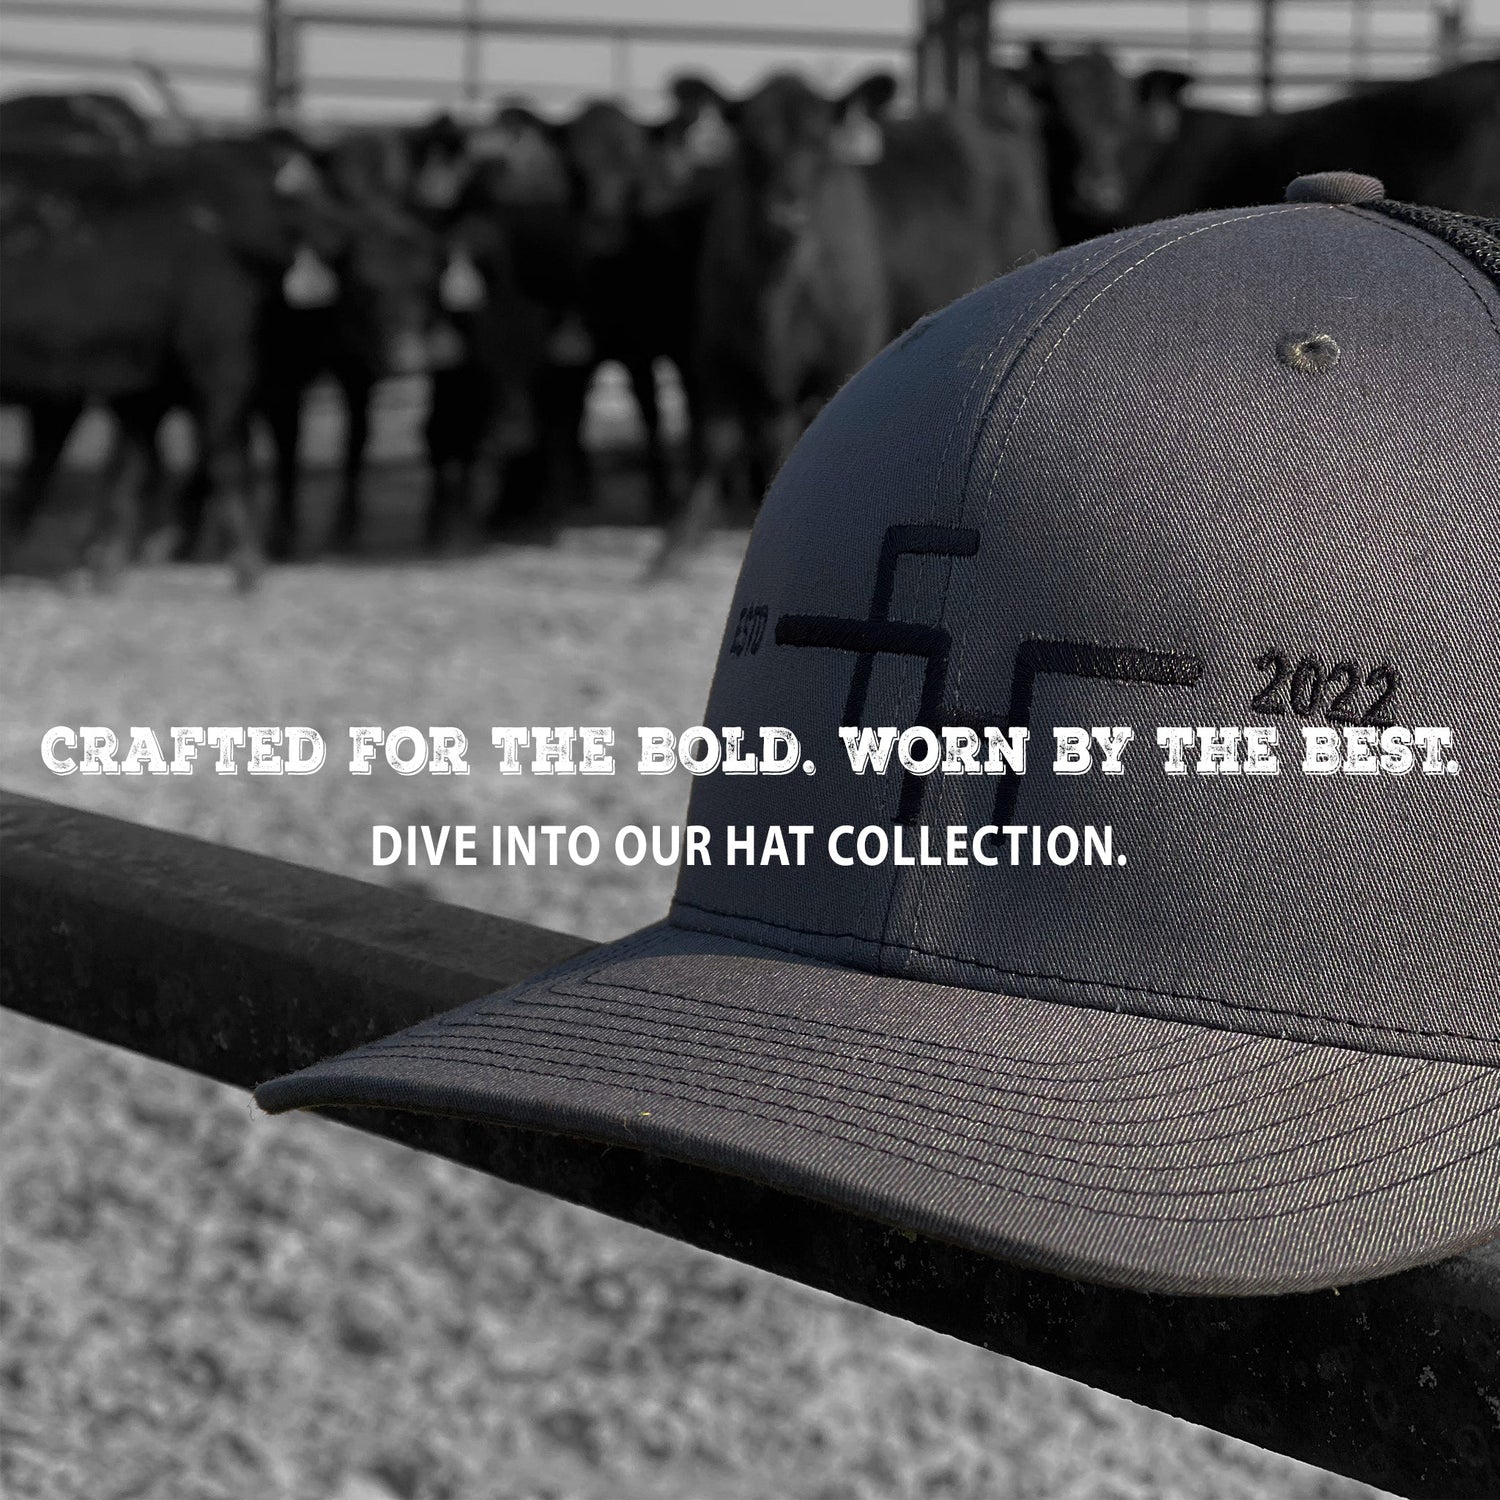 Hat Collecton - Fairhope Roughstock Co.